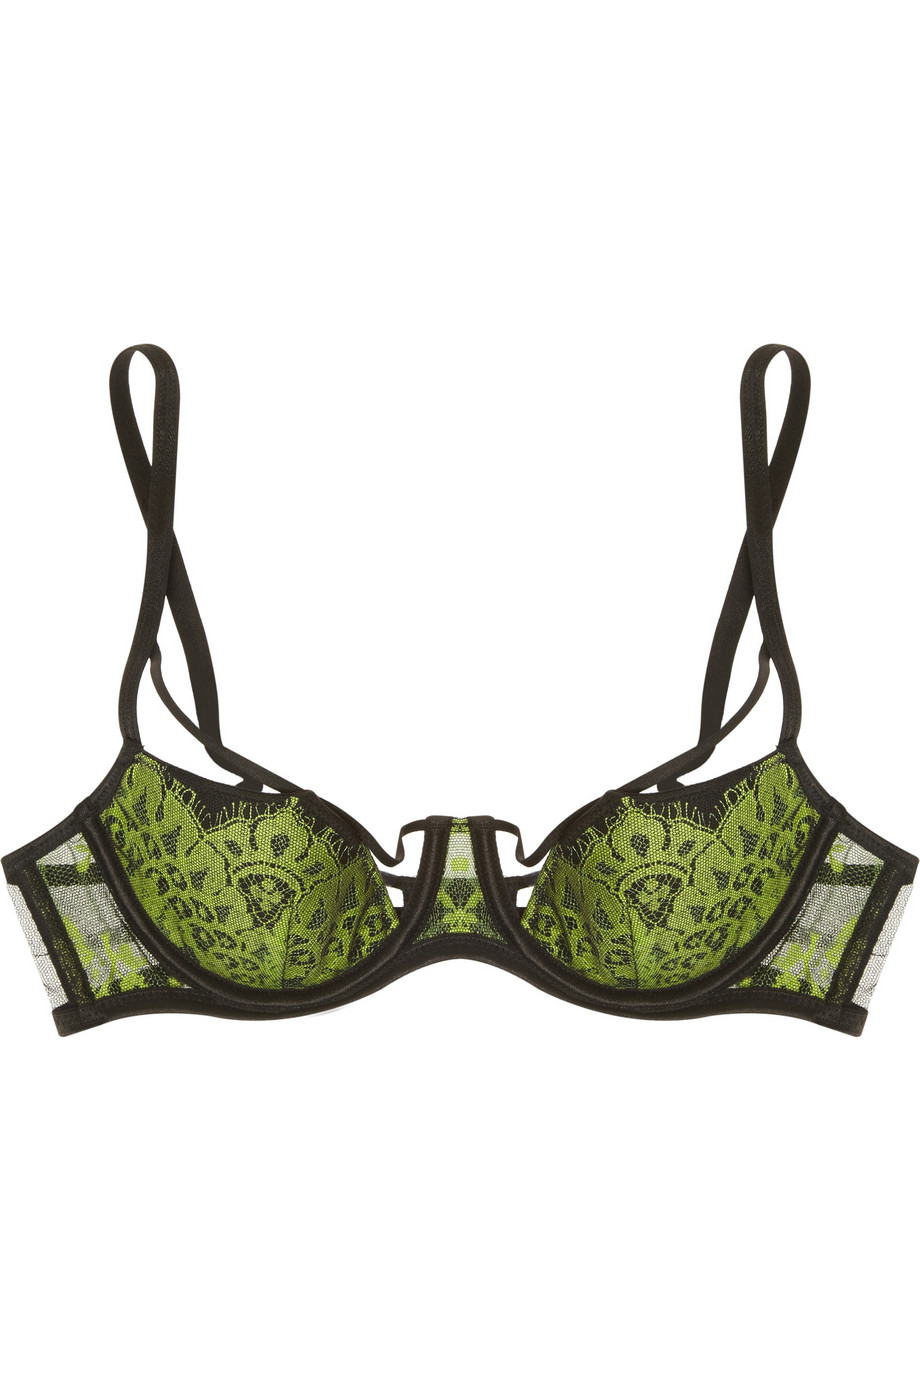 Agent Provocateur Electra Lace And Tulle Plunge Bra in Yellow (Green) - Lyst